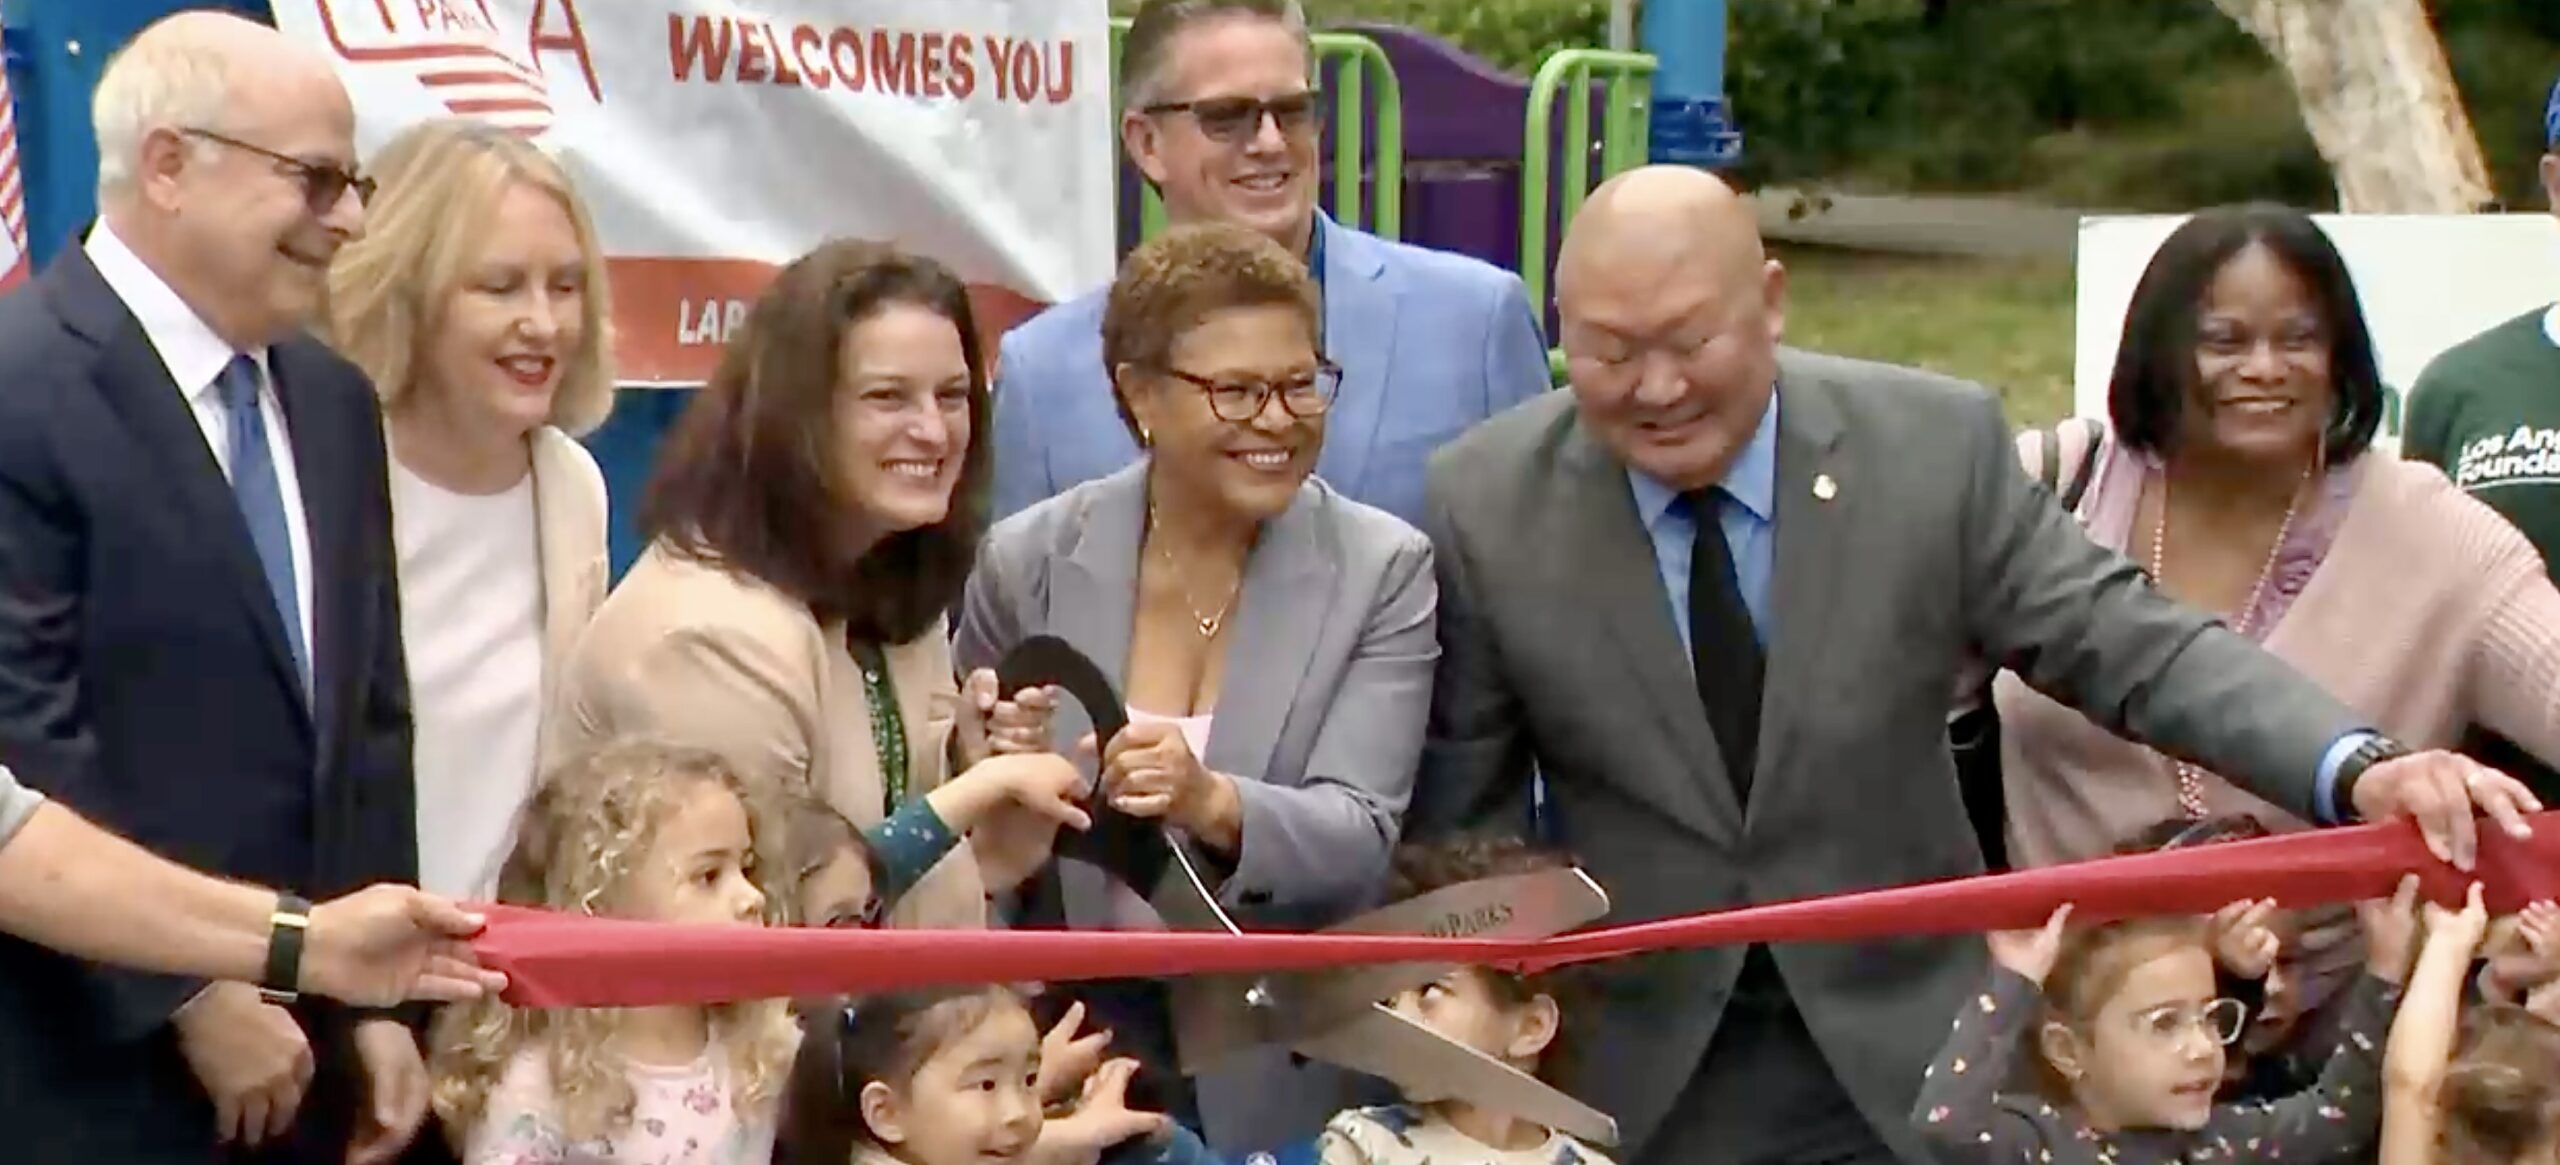 Mayor Karen Bass and CD5 Councilmember Katy Yaroslavsky Officially Open Pan Pacific Park Play Structure